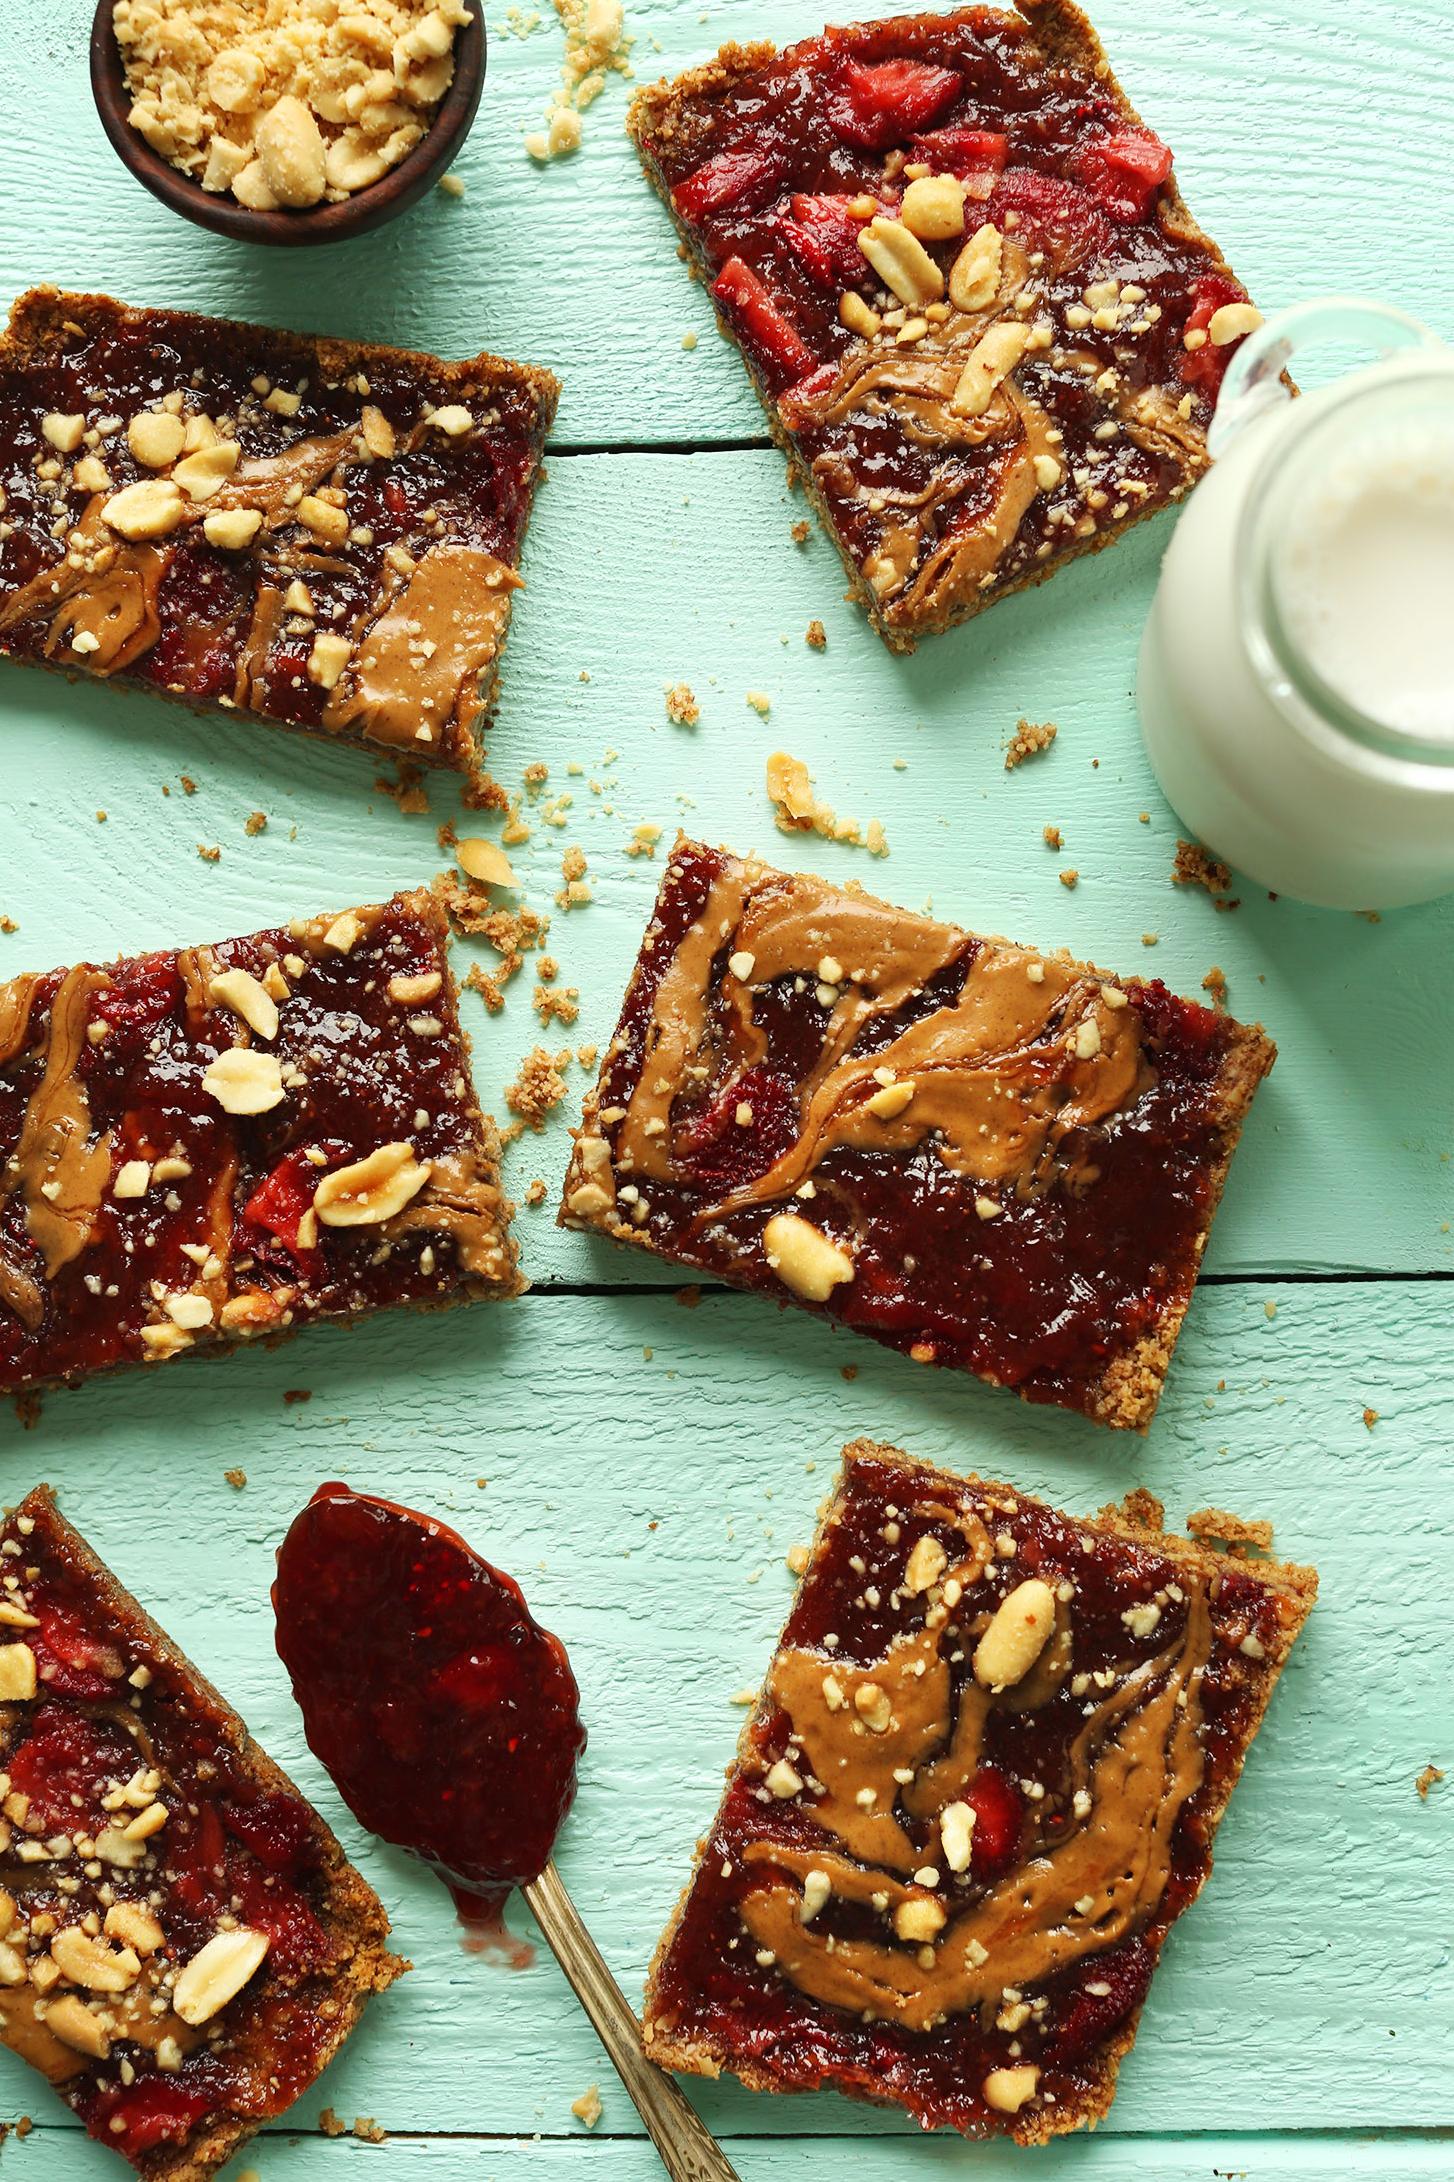 Peanut Butter and Jelly Snack Bars (Gluten Free)